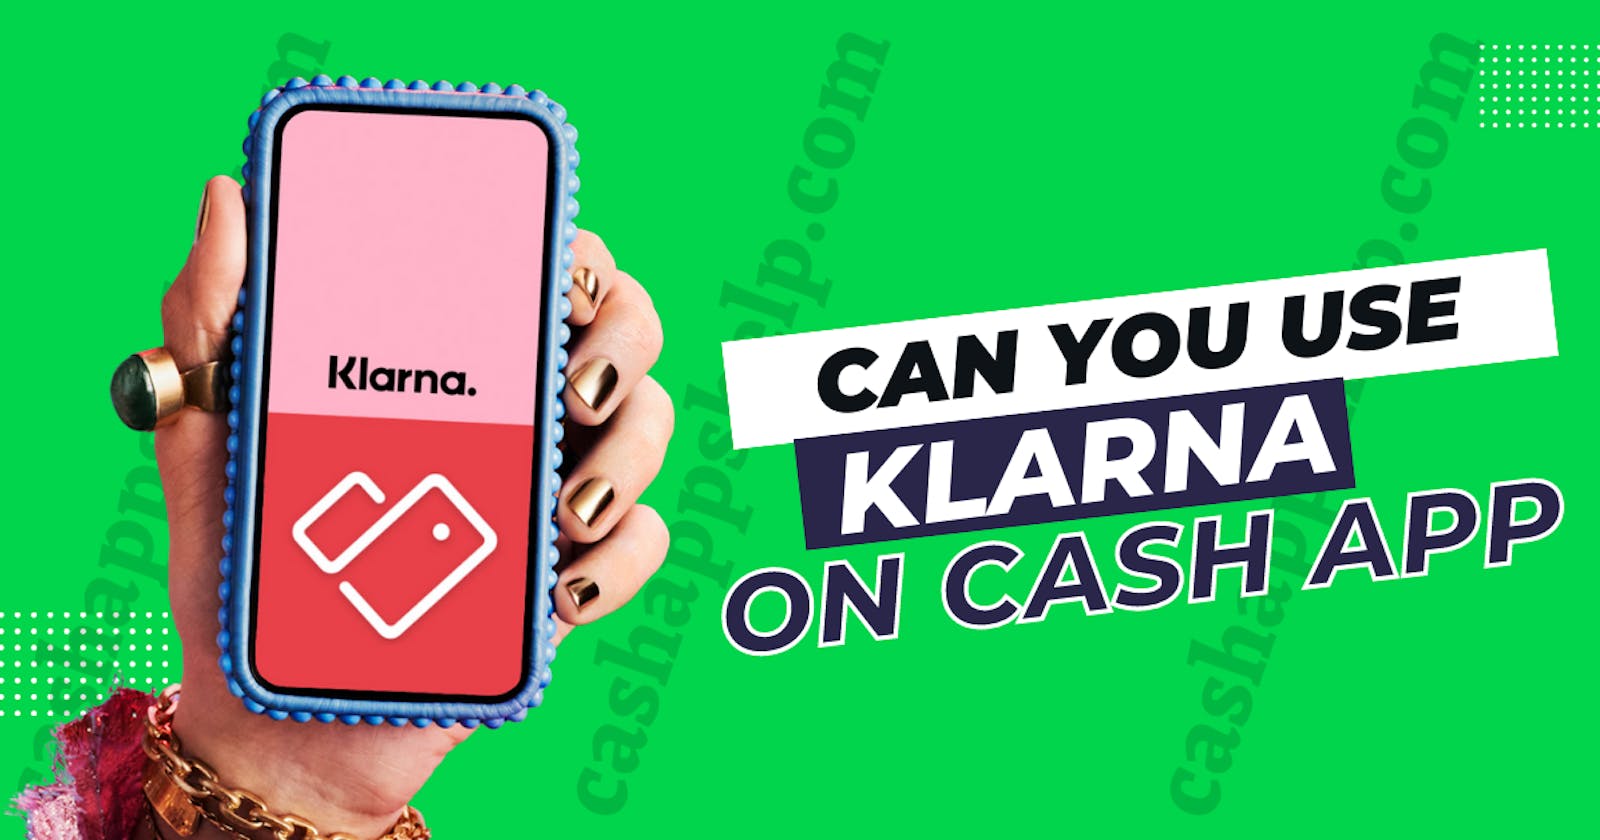 Can You Use Klarna on Cash App?